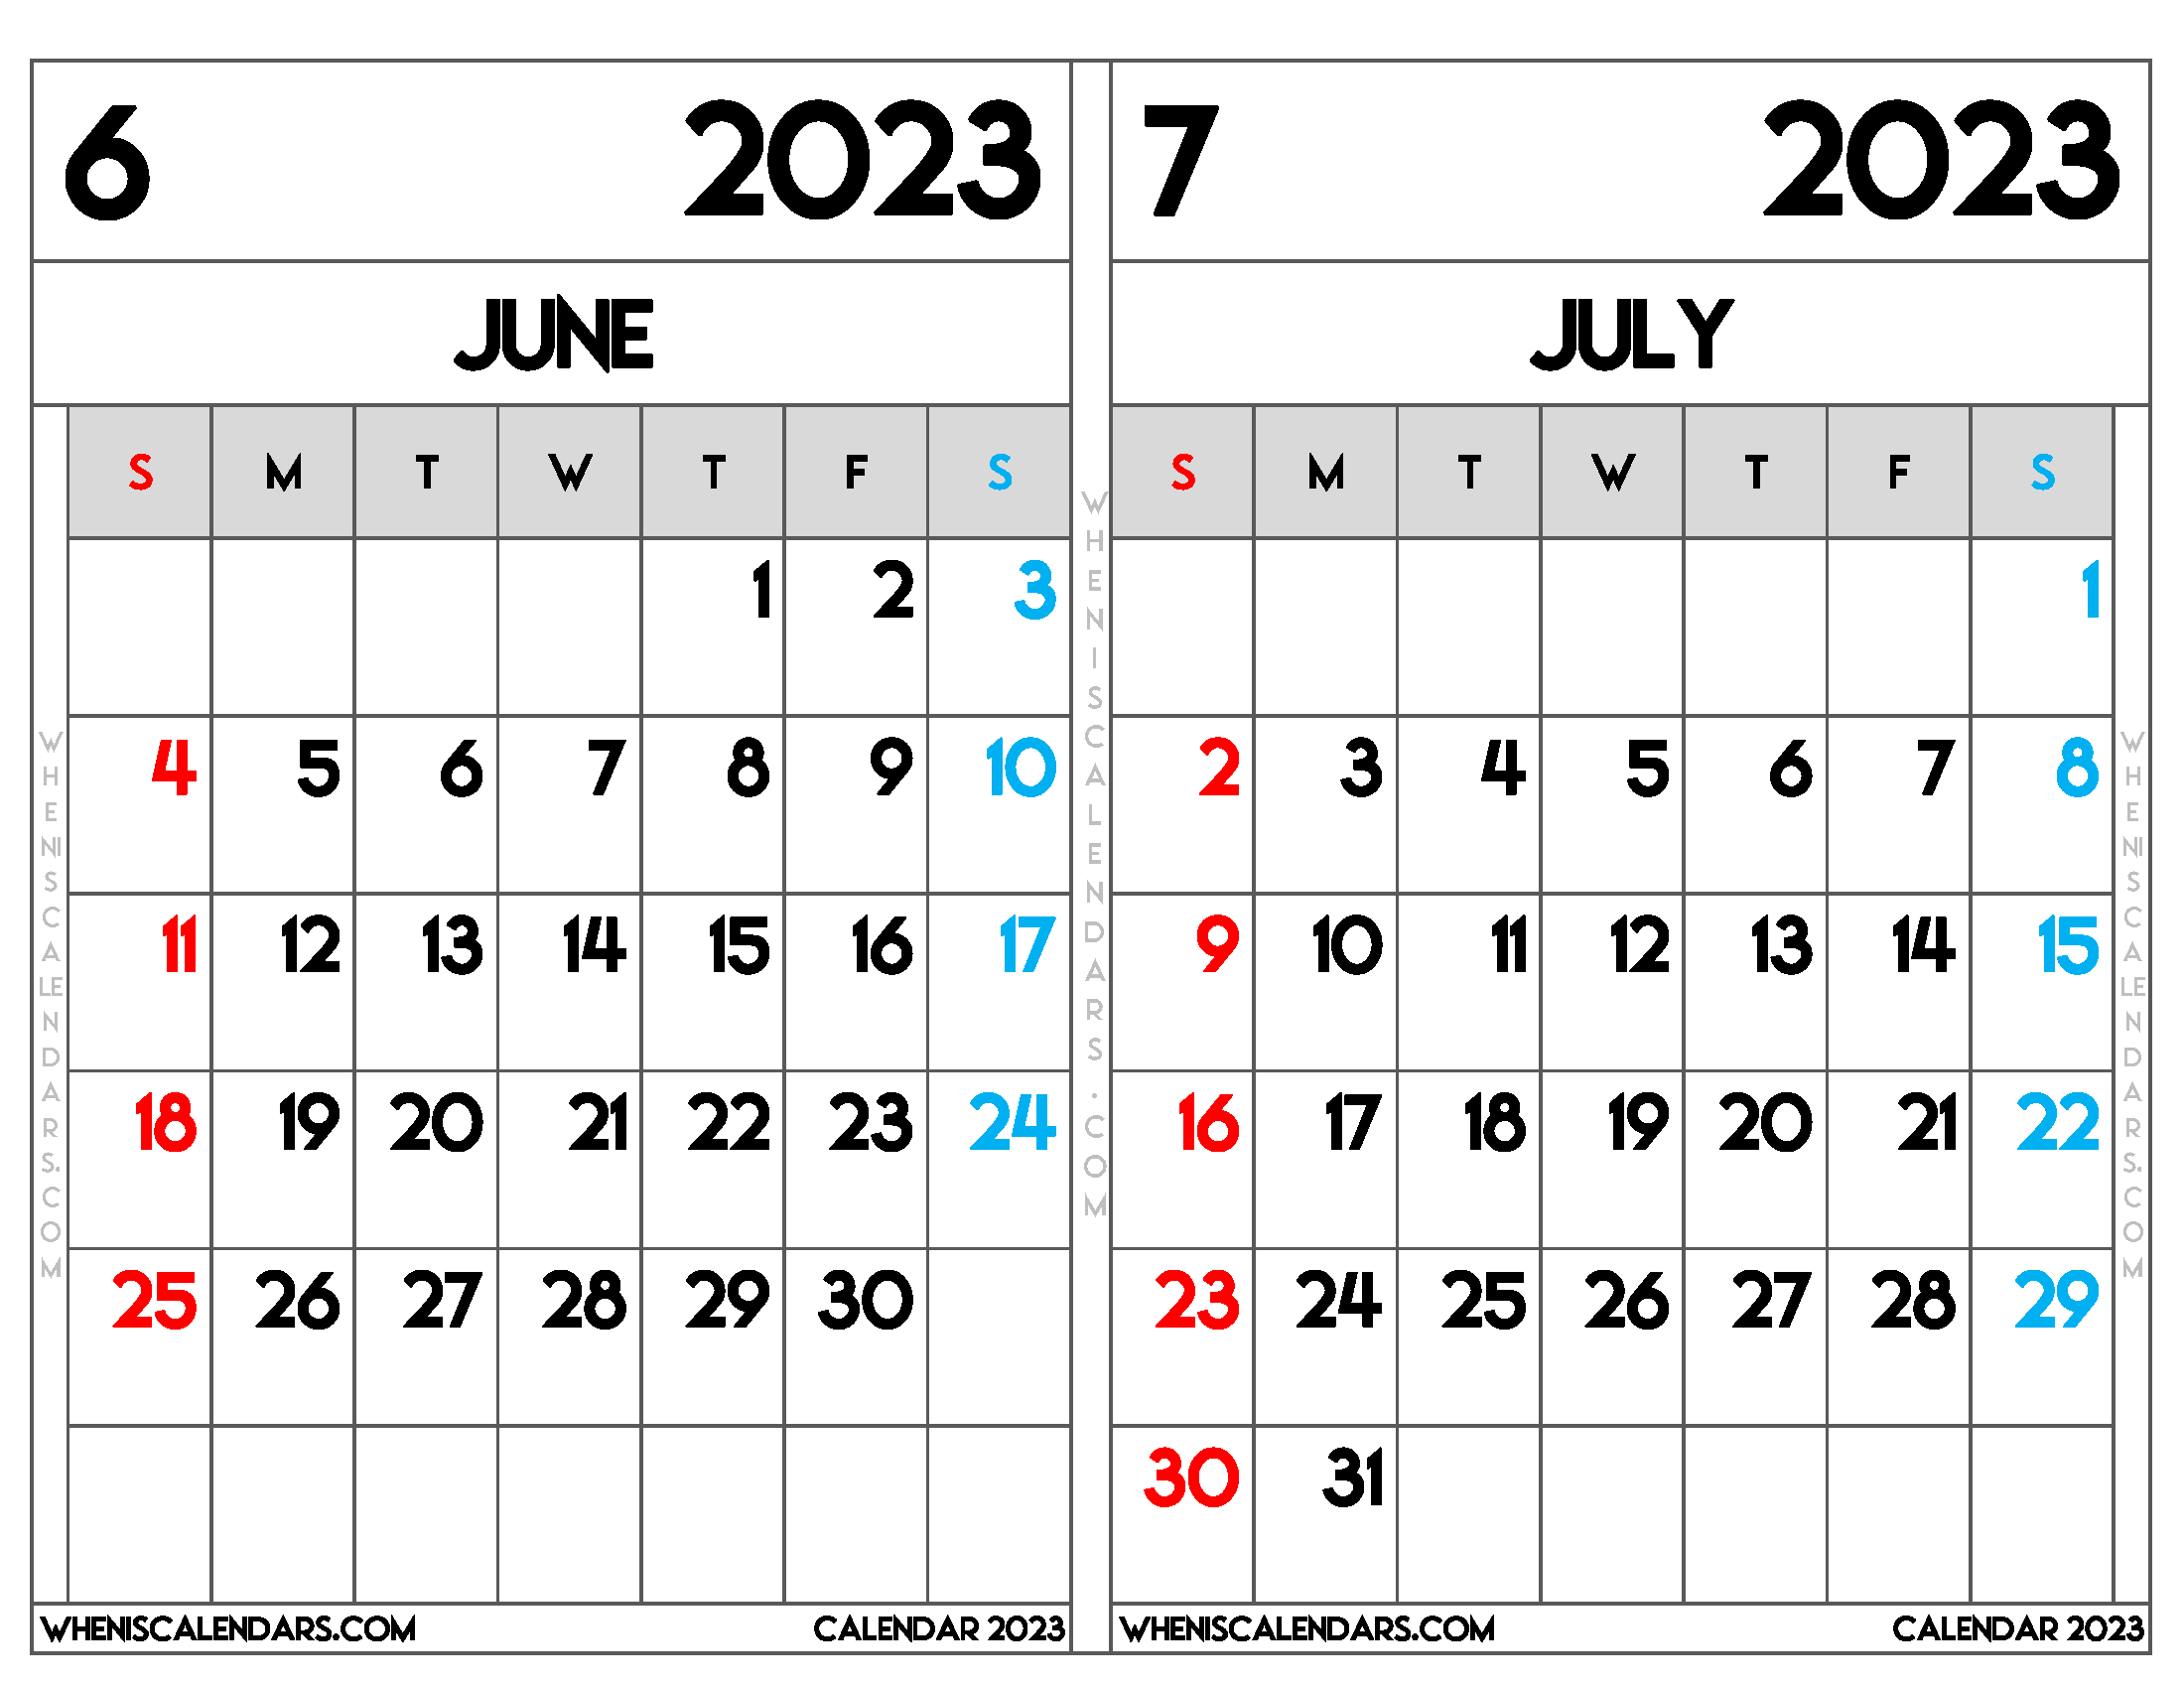 Download Printable June and July 2023 Calendar as PDF and PNG Image